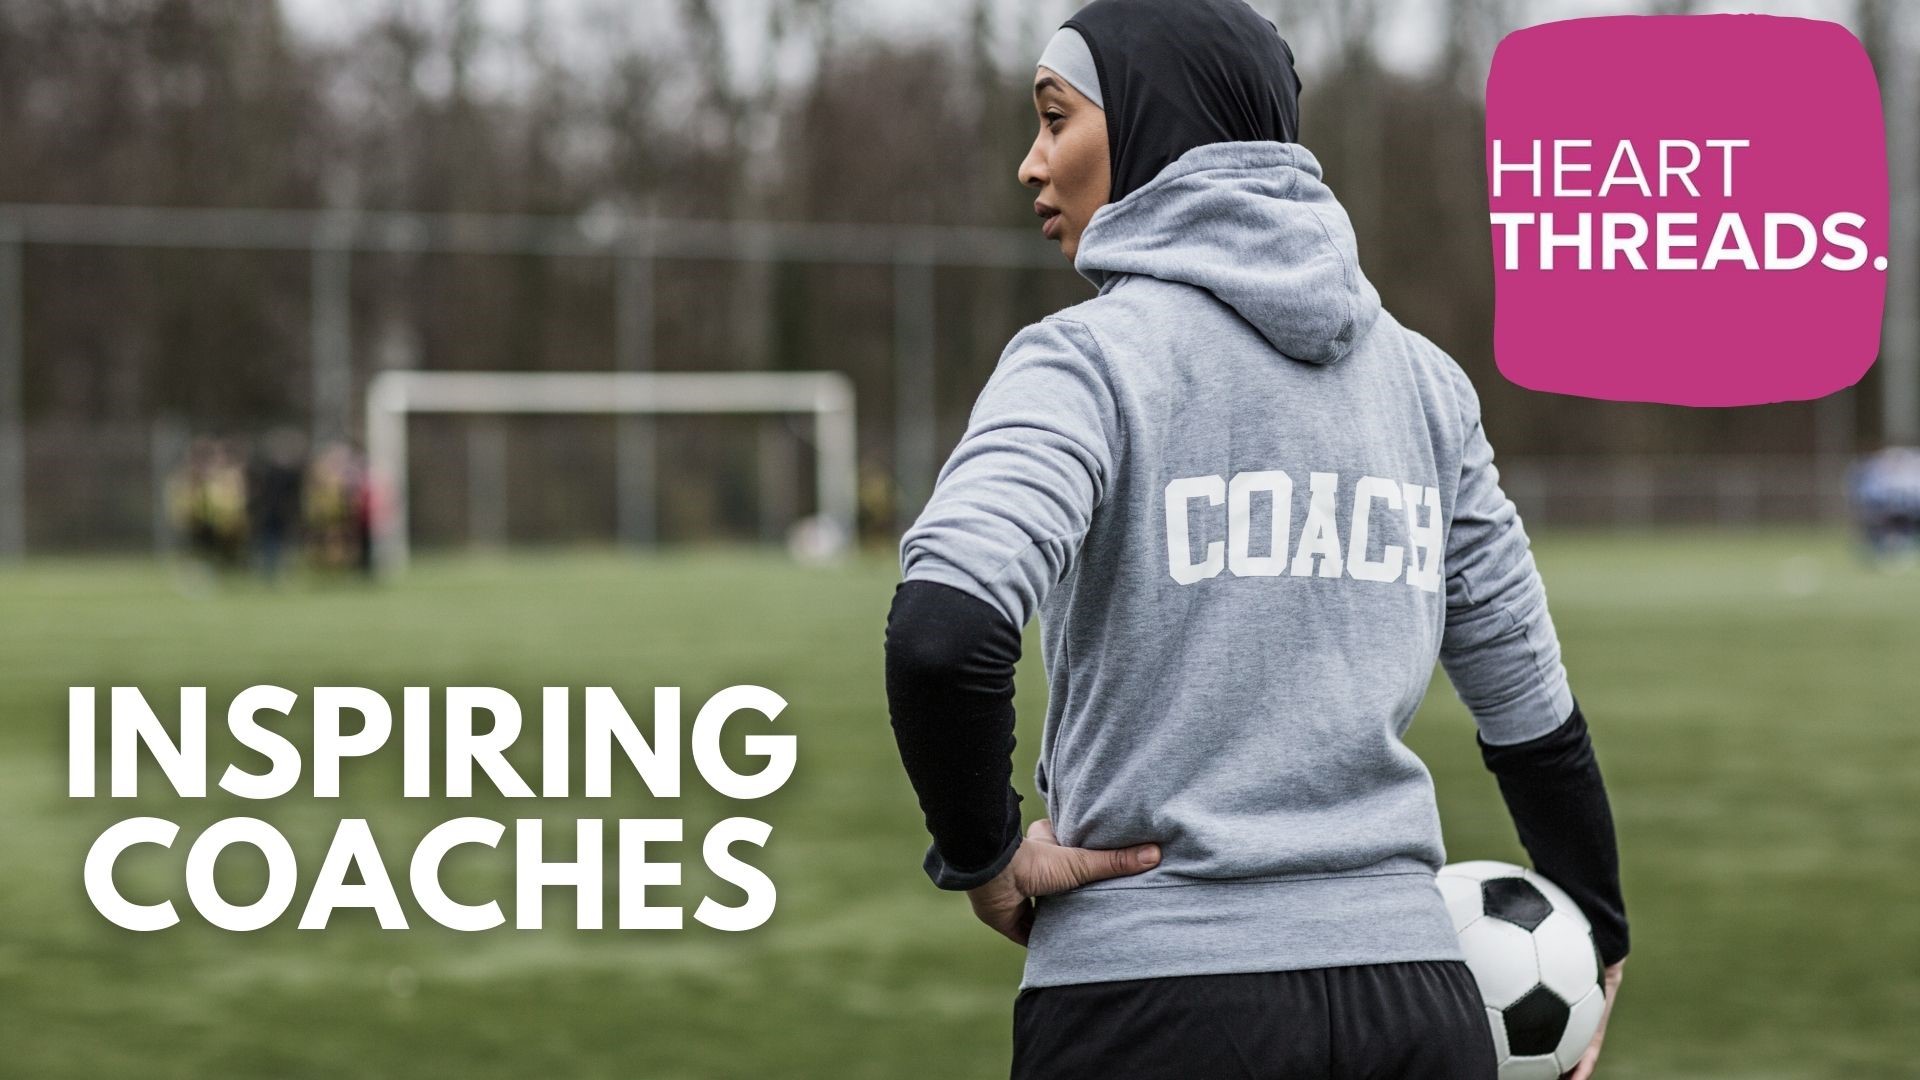 Coaches have the ability to inspire others and push them to be their best. We introduce you to coaches around the country who are helping athletes reach success.